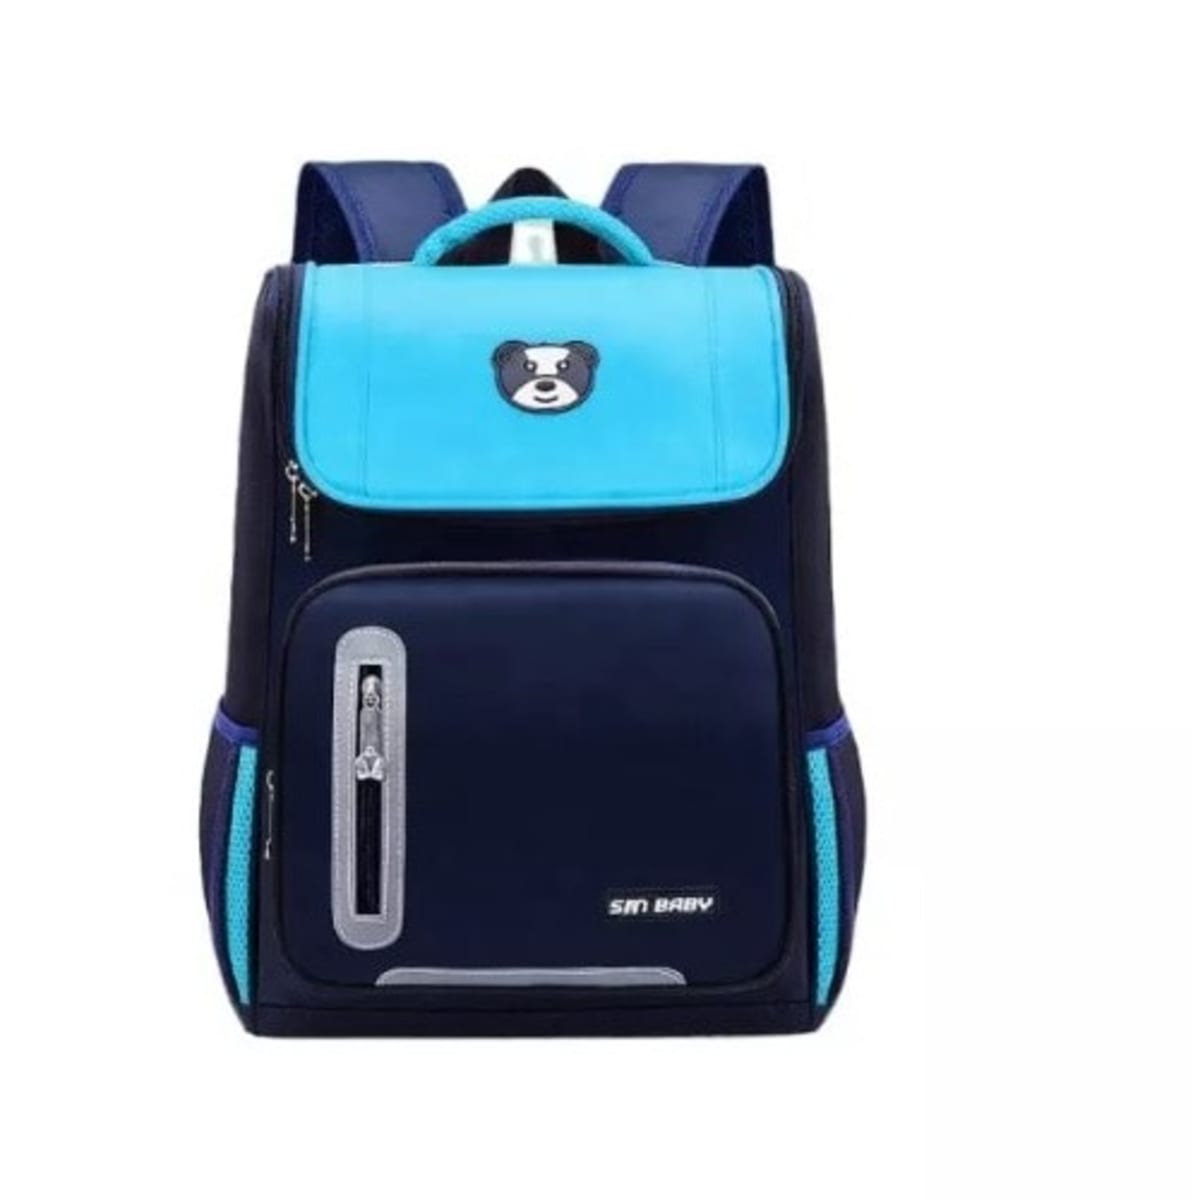 School Bag For Boys -18 inches